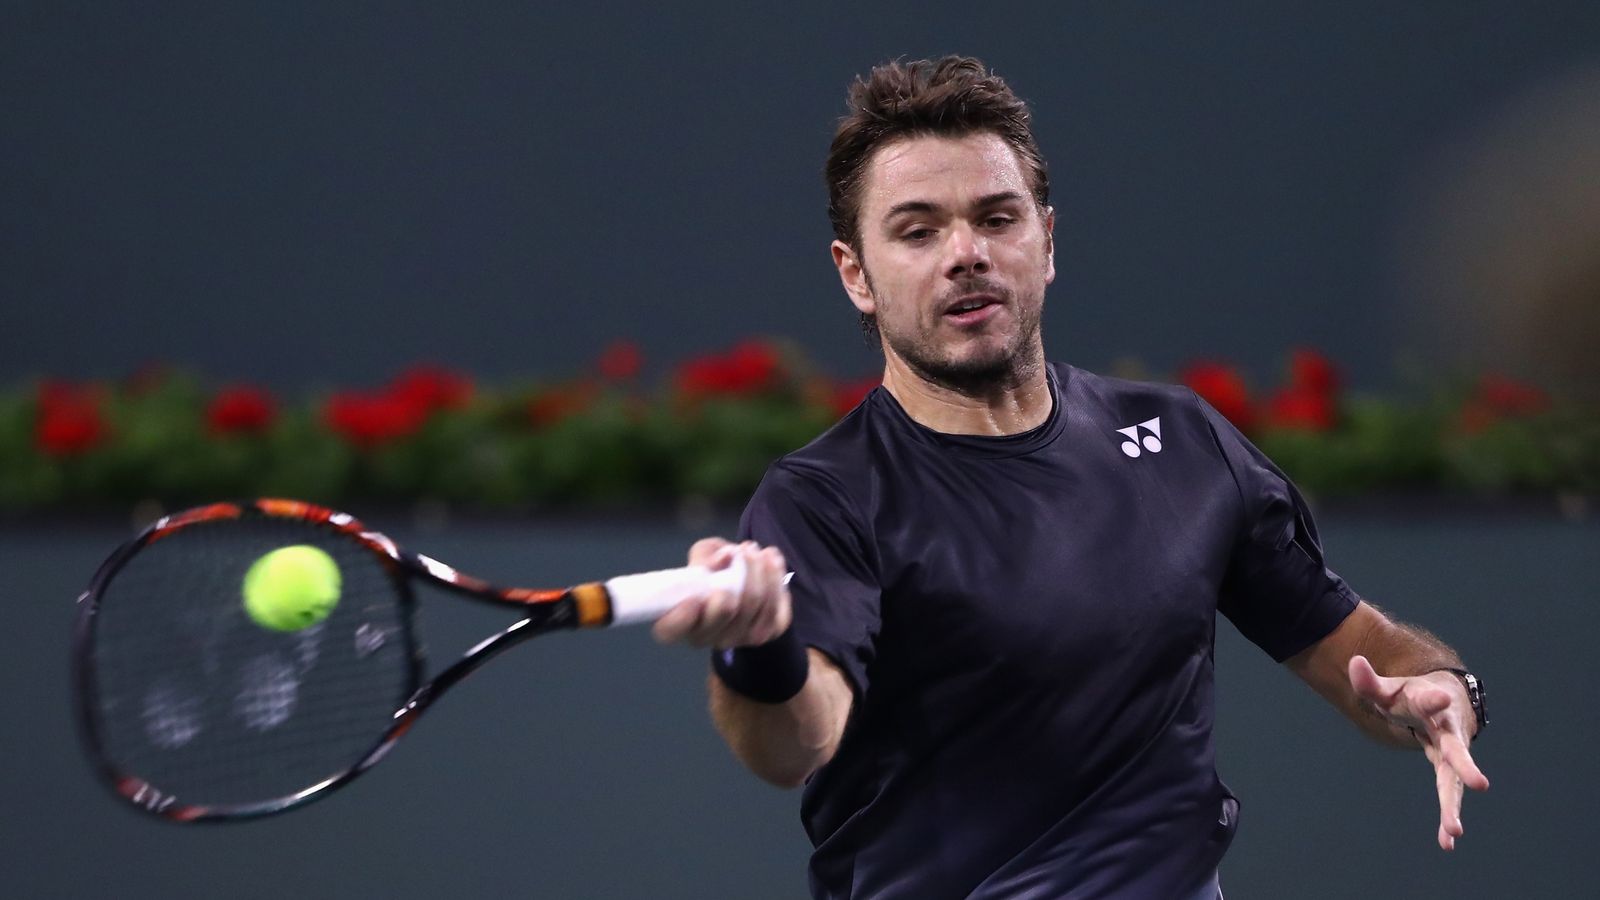 Stan Wawrinka to face David Goffin in Indian Wells fourth round